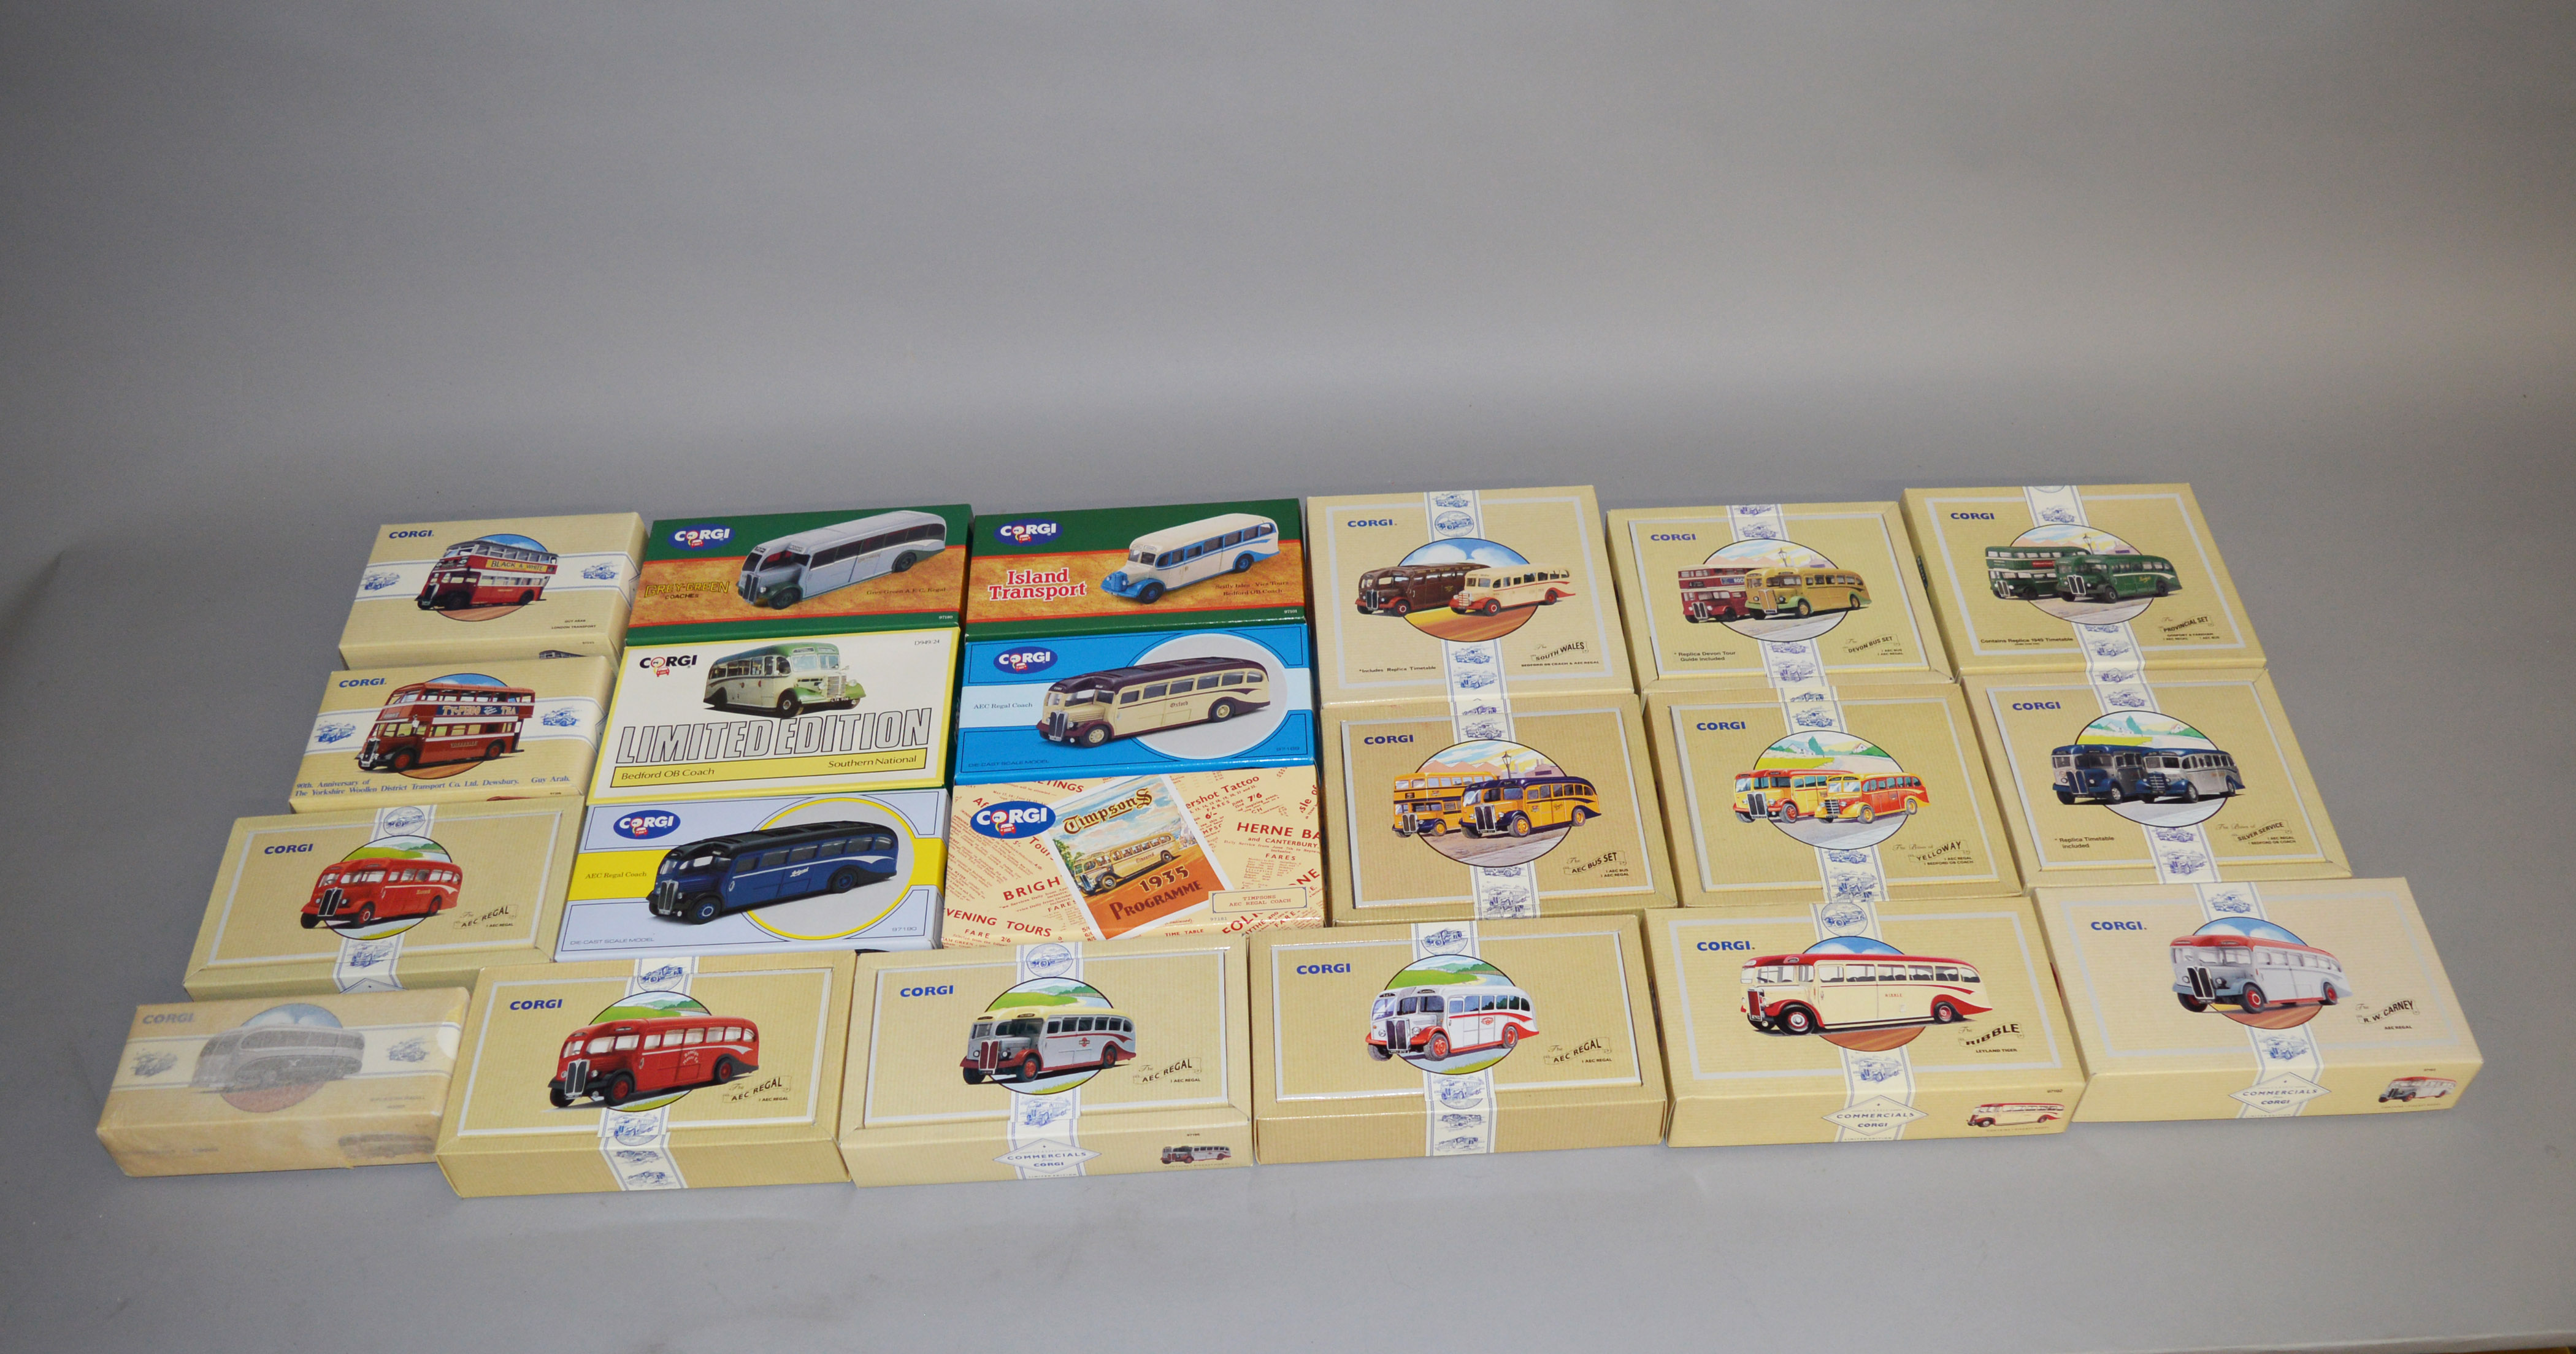 21 x Corgi diecast model buses and coaches, mainly Classics, including some gift sets. Boxed and VG.